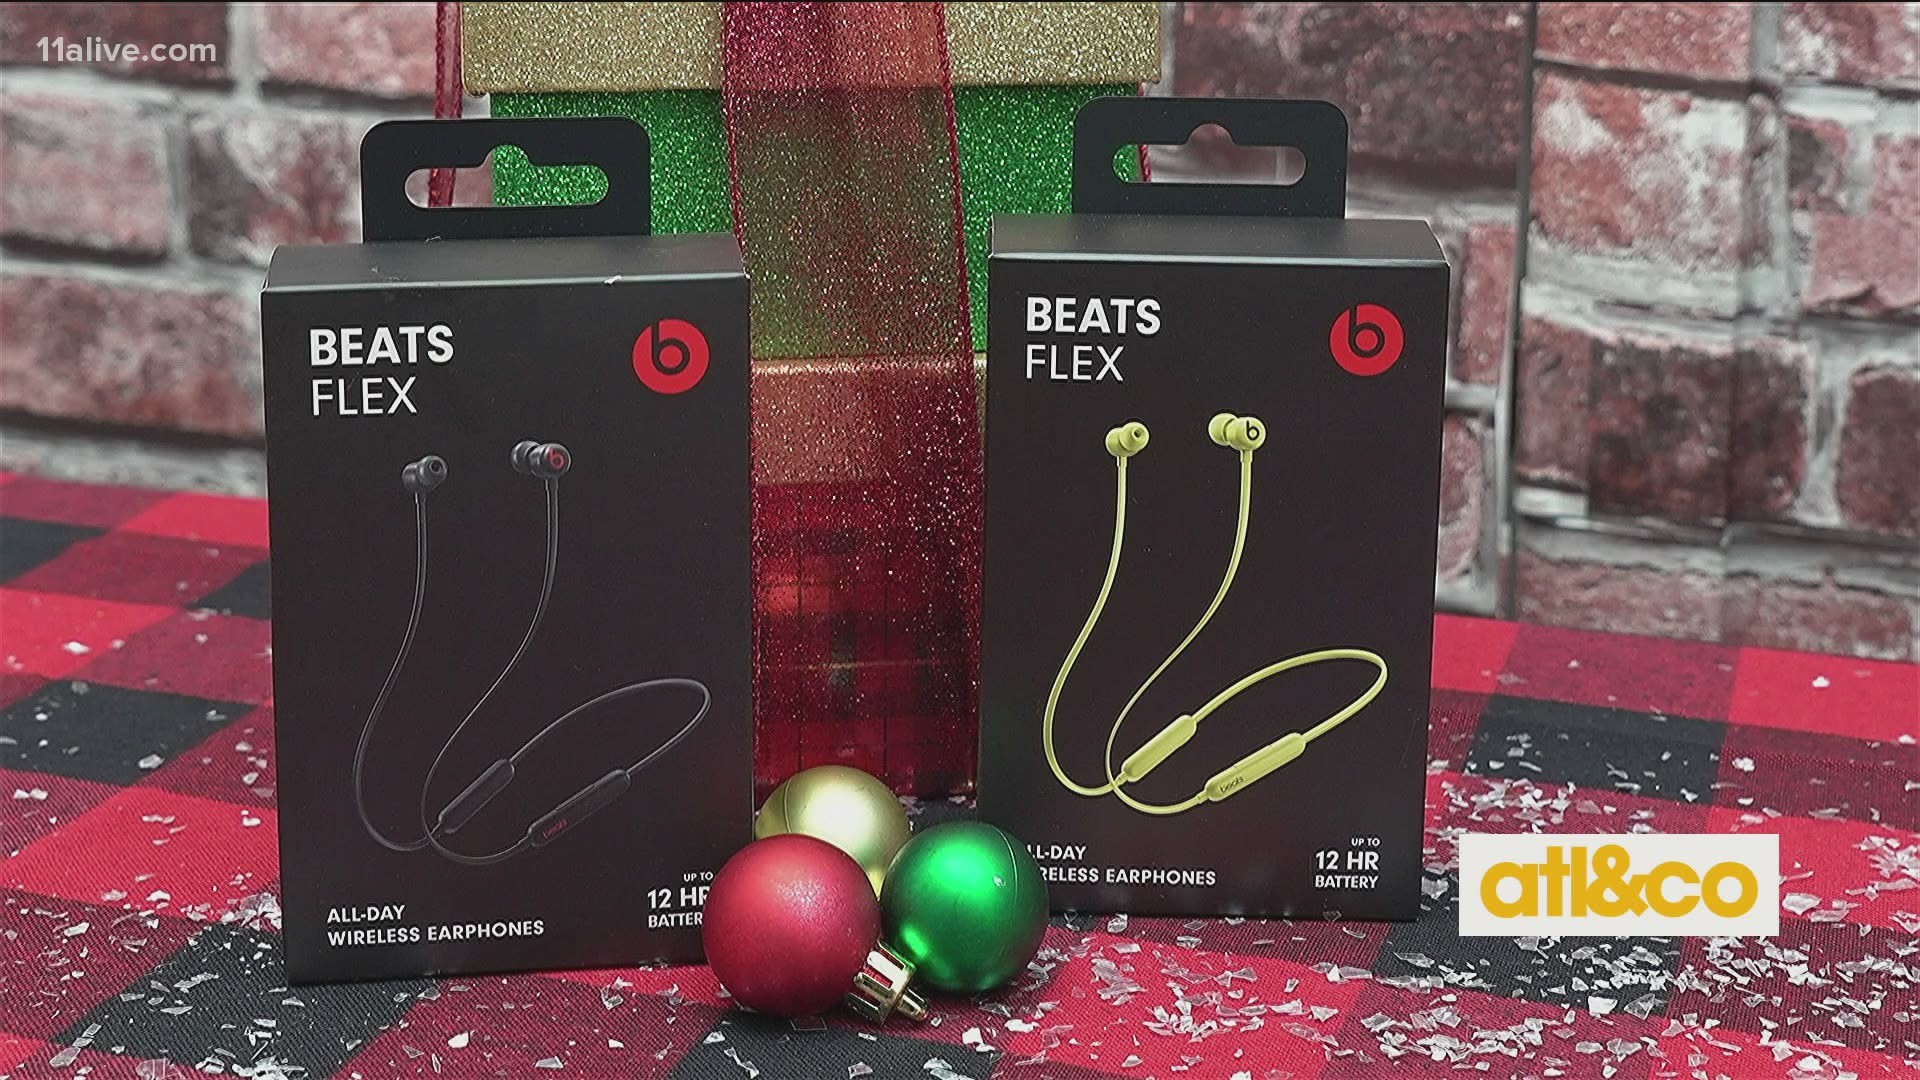 Lifestyle expert Limor Suss shares her favorite gifts for everyone on your list, from brands Beats Flex, JCPenney, Vooks, Hot Tools, and Diageo.